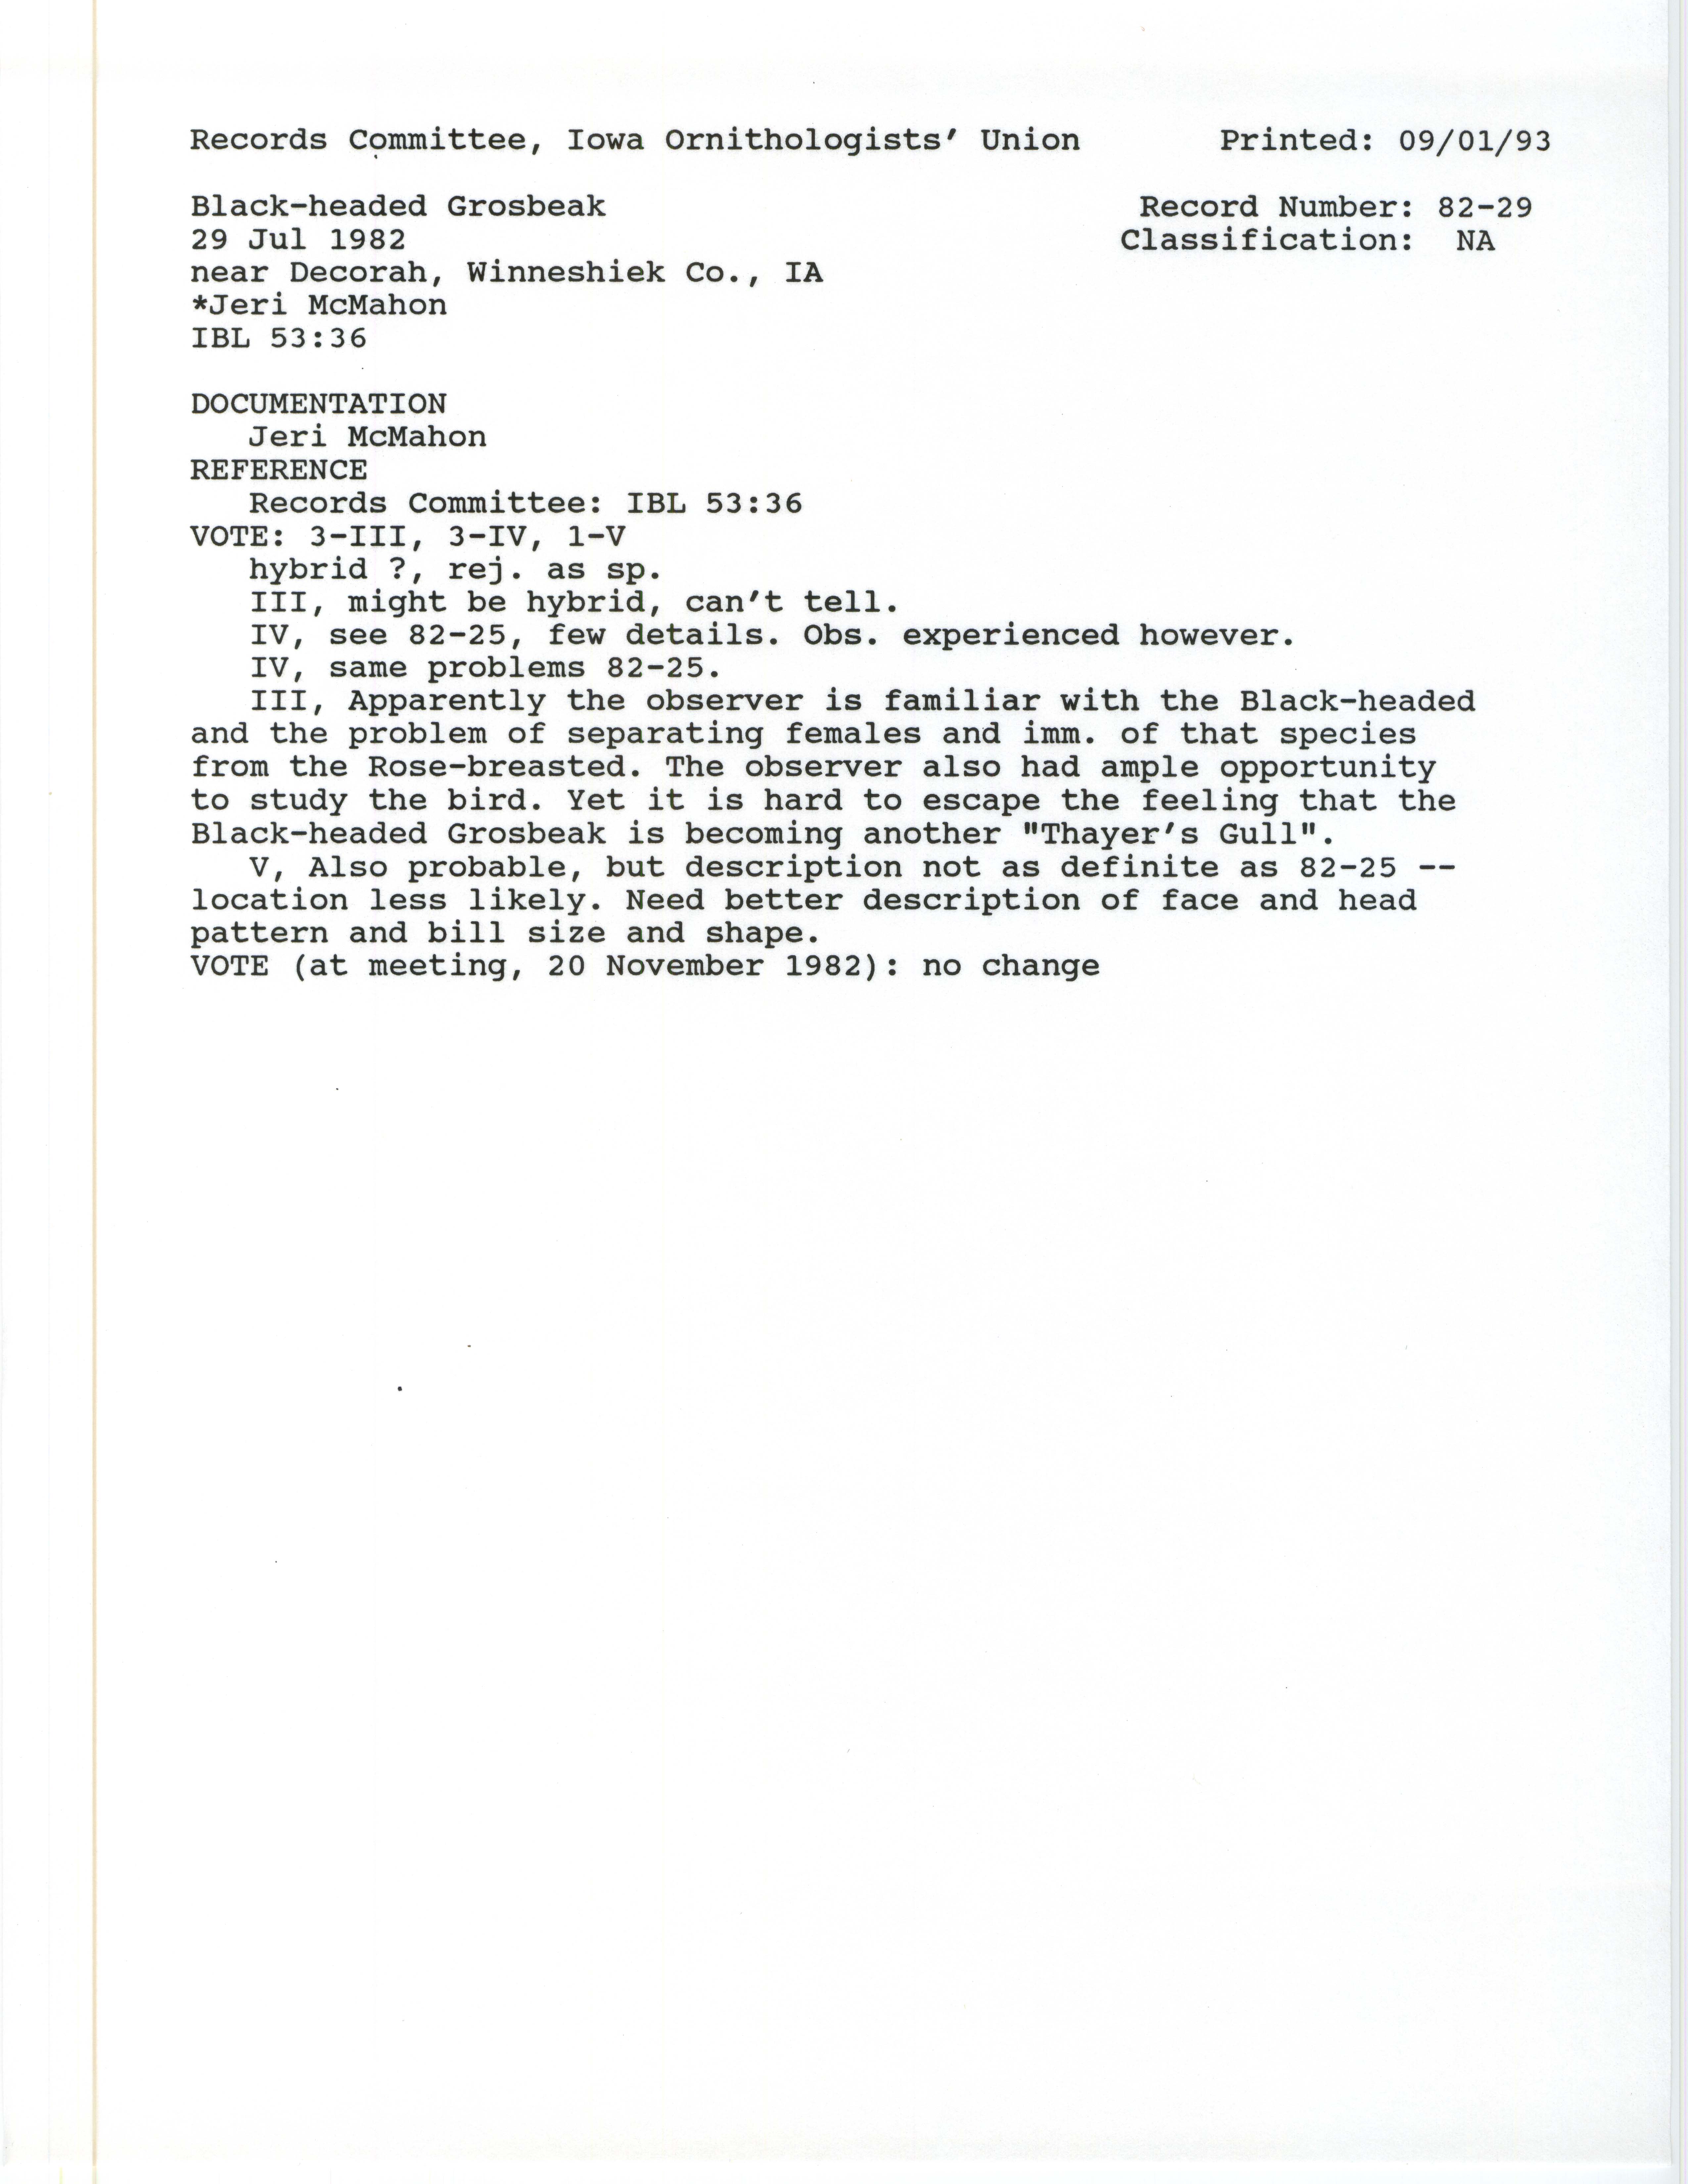 Records Committee review for rare bird sighting for Black-headed Grosbeak at Decorah, 1982